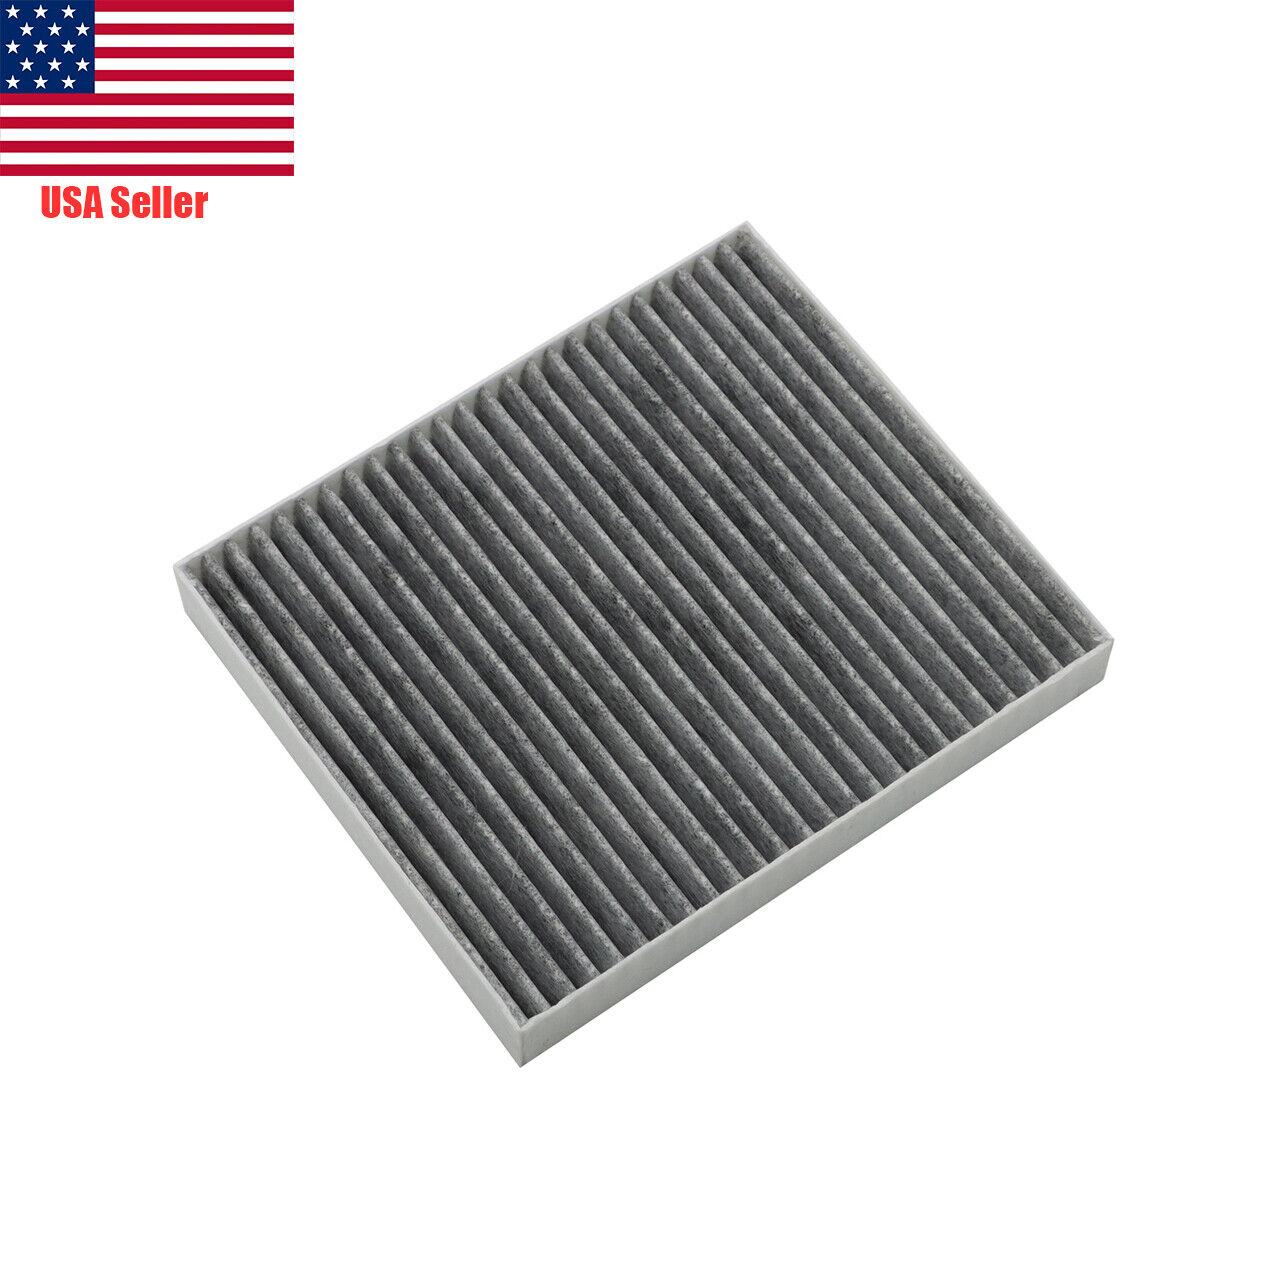 Cabin Air Filter For Buick Enclave Chevy Equinox Impala Malibu GMC NJ D27